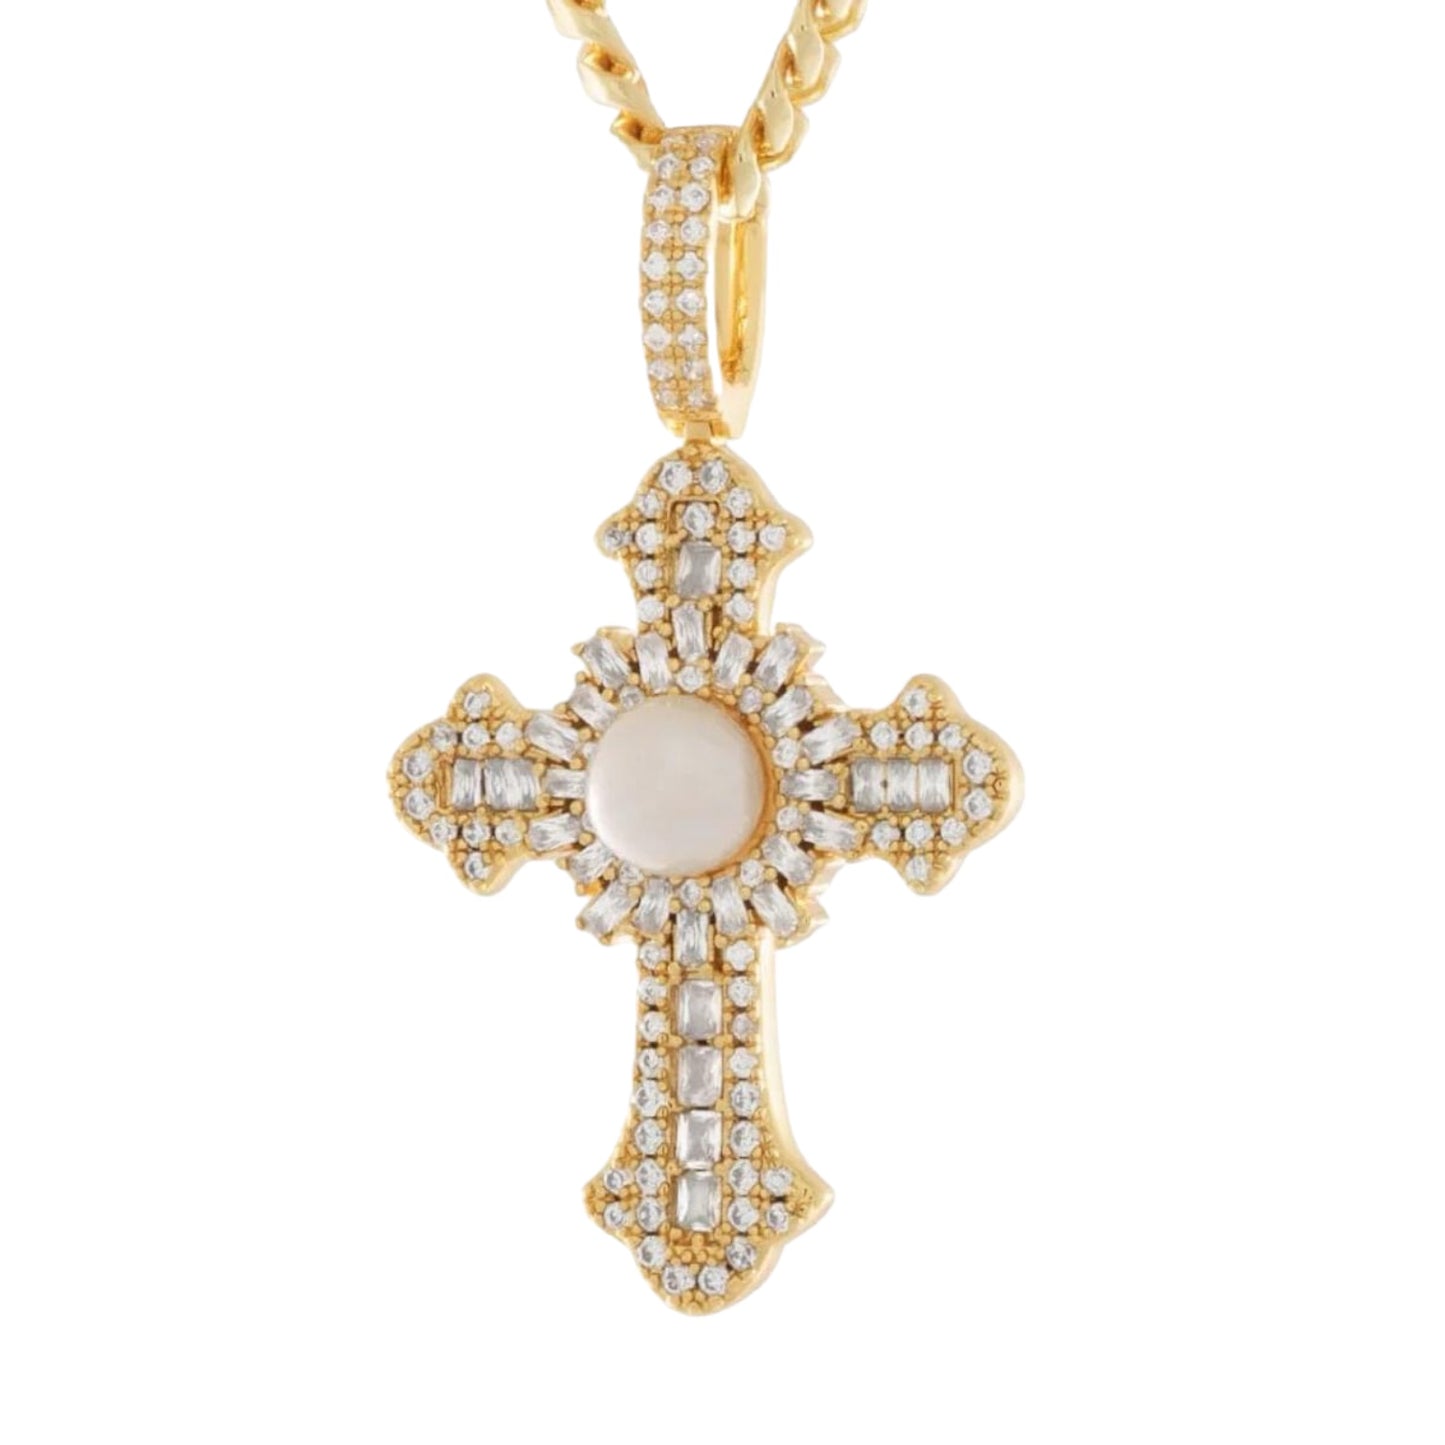 KING ICE: Pearl of Wisdom Cross Necklace